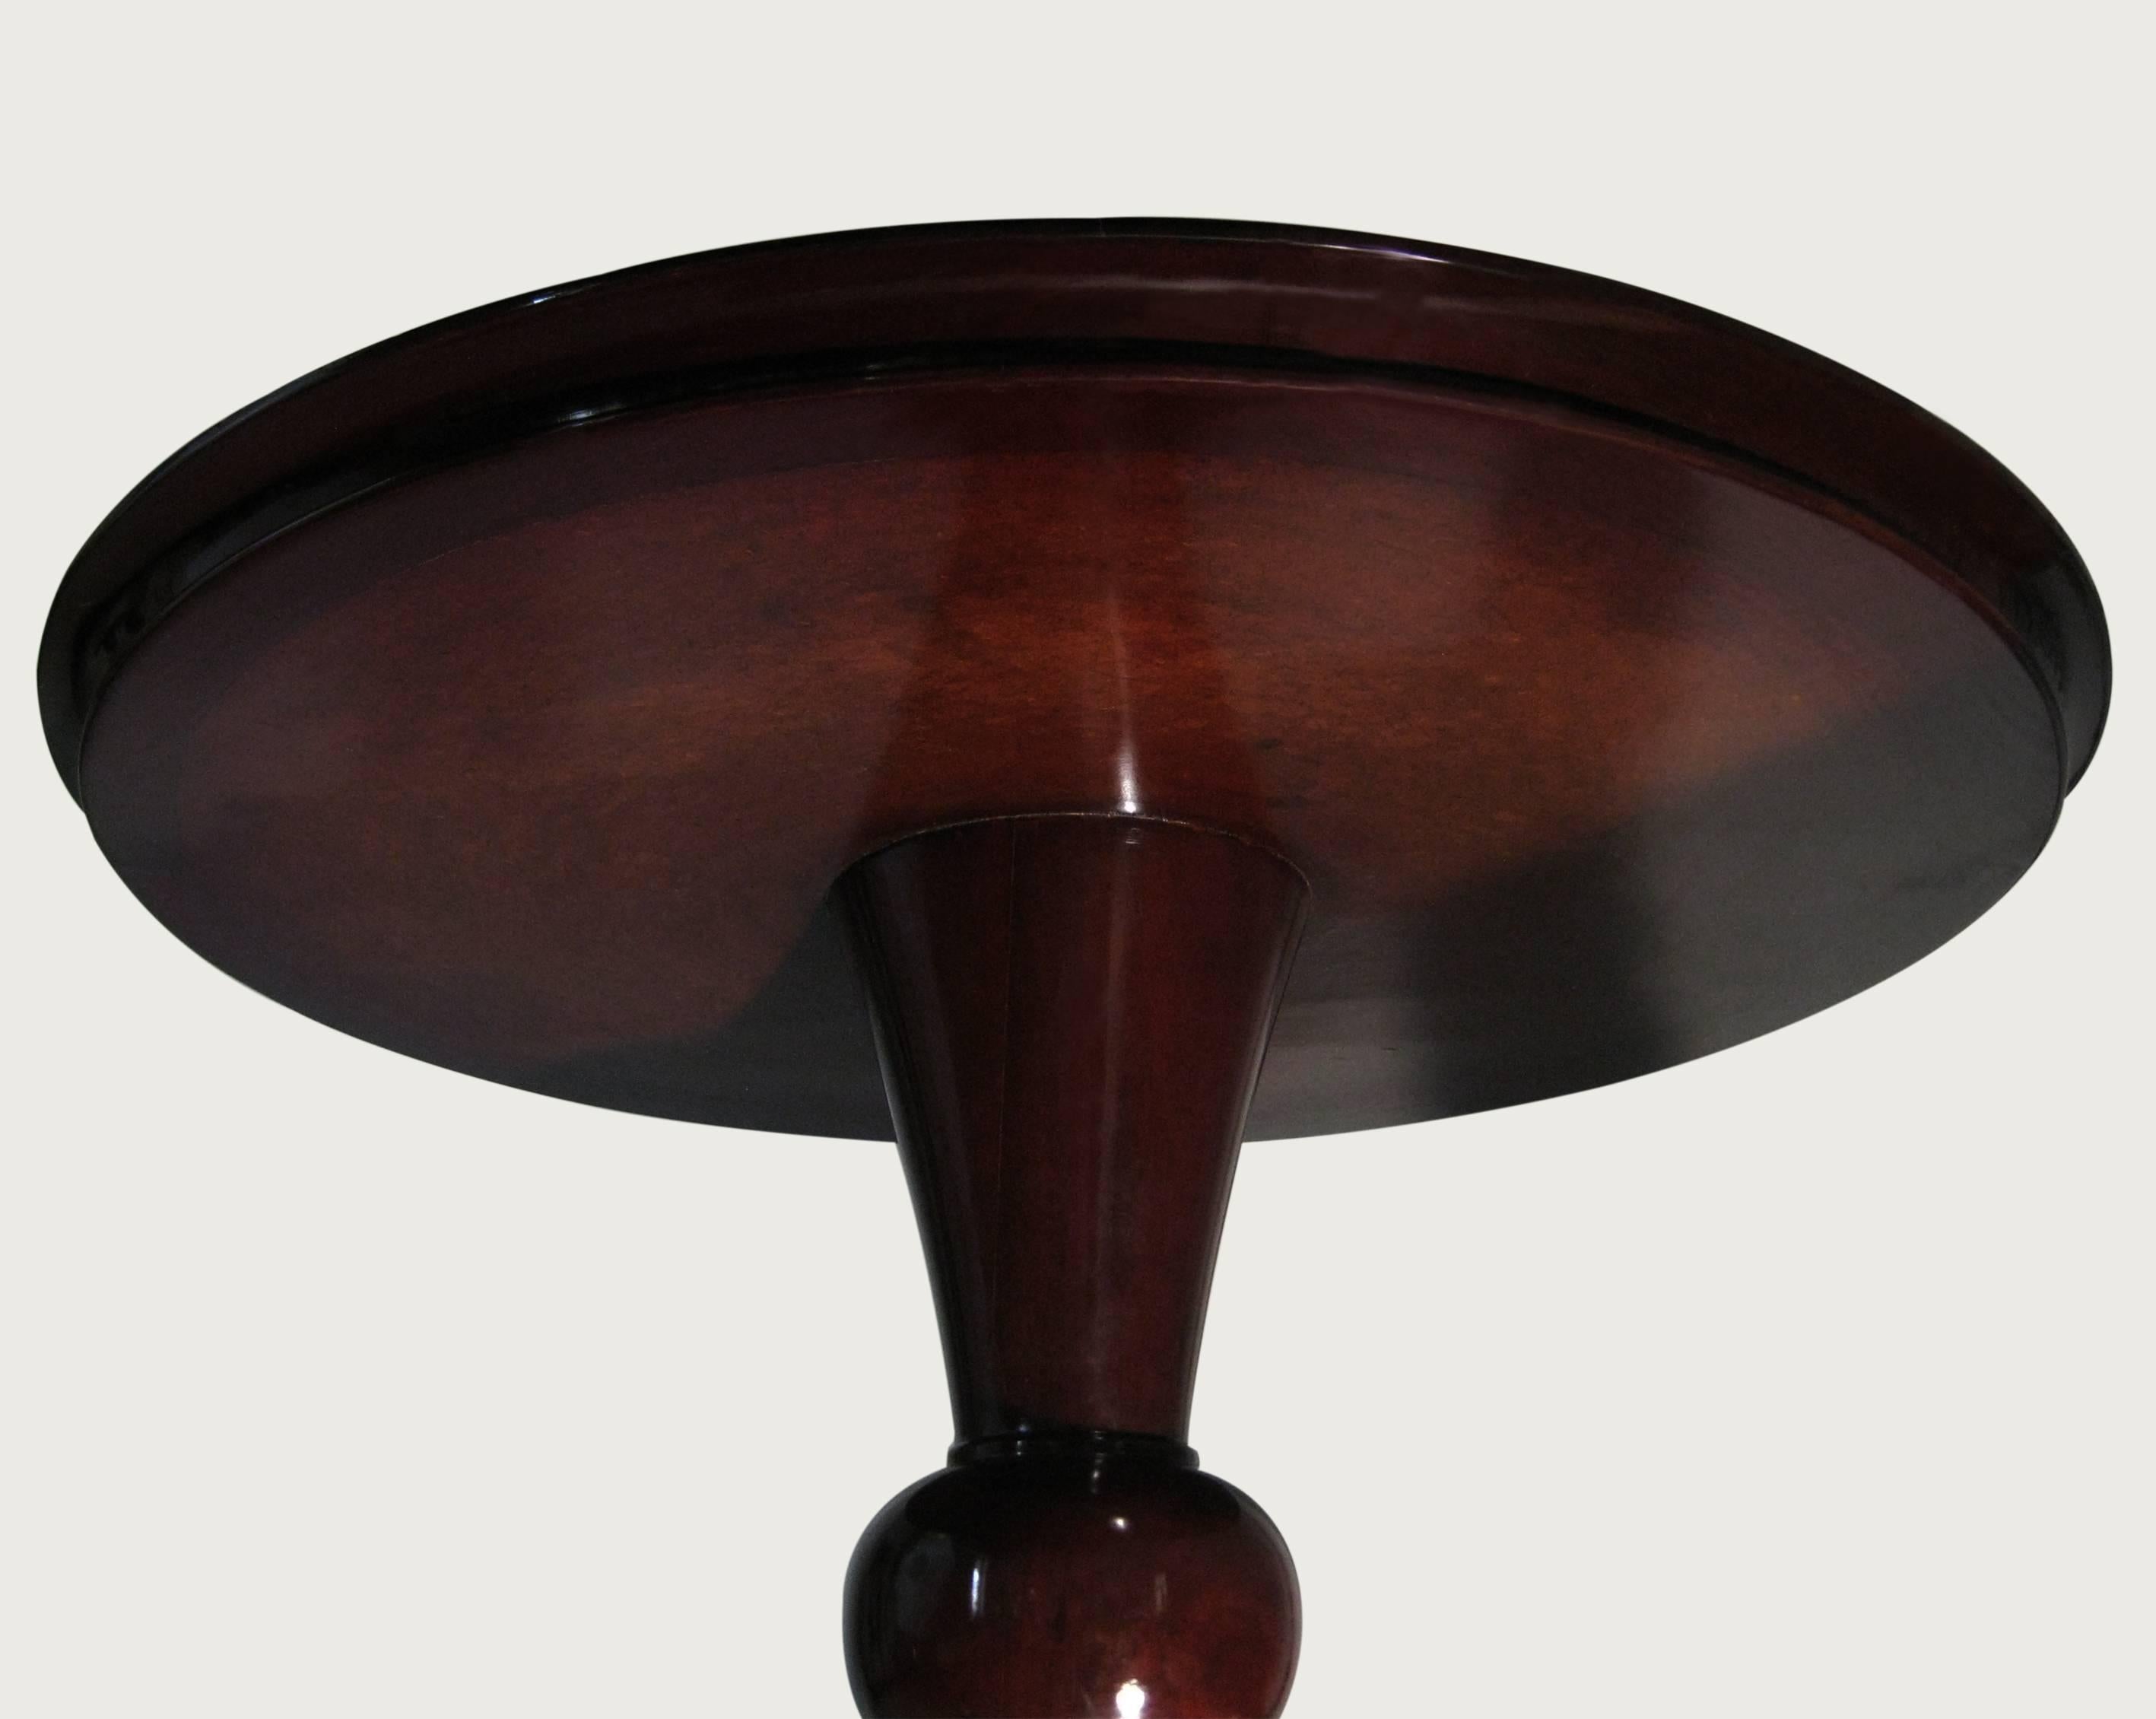 Pair of Side Tables, Mahogany and Bronze, Arturo Pani, Mexico, circa 1950 For Sale 3